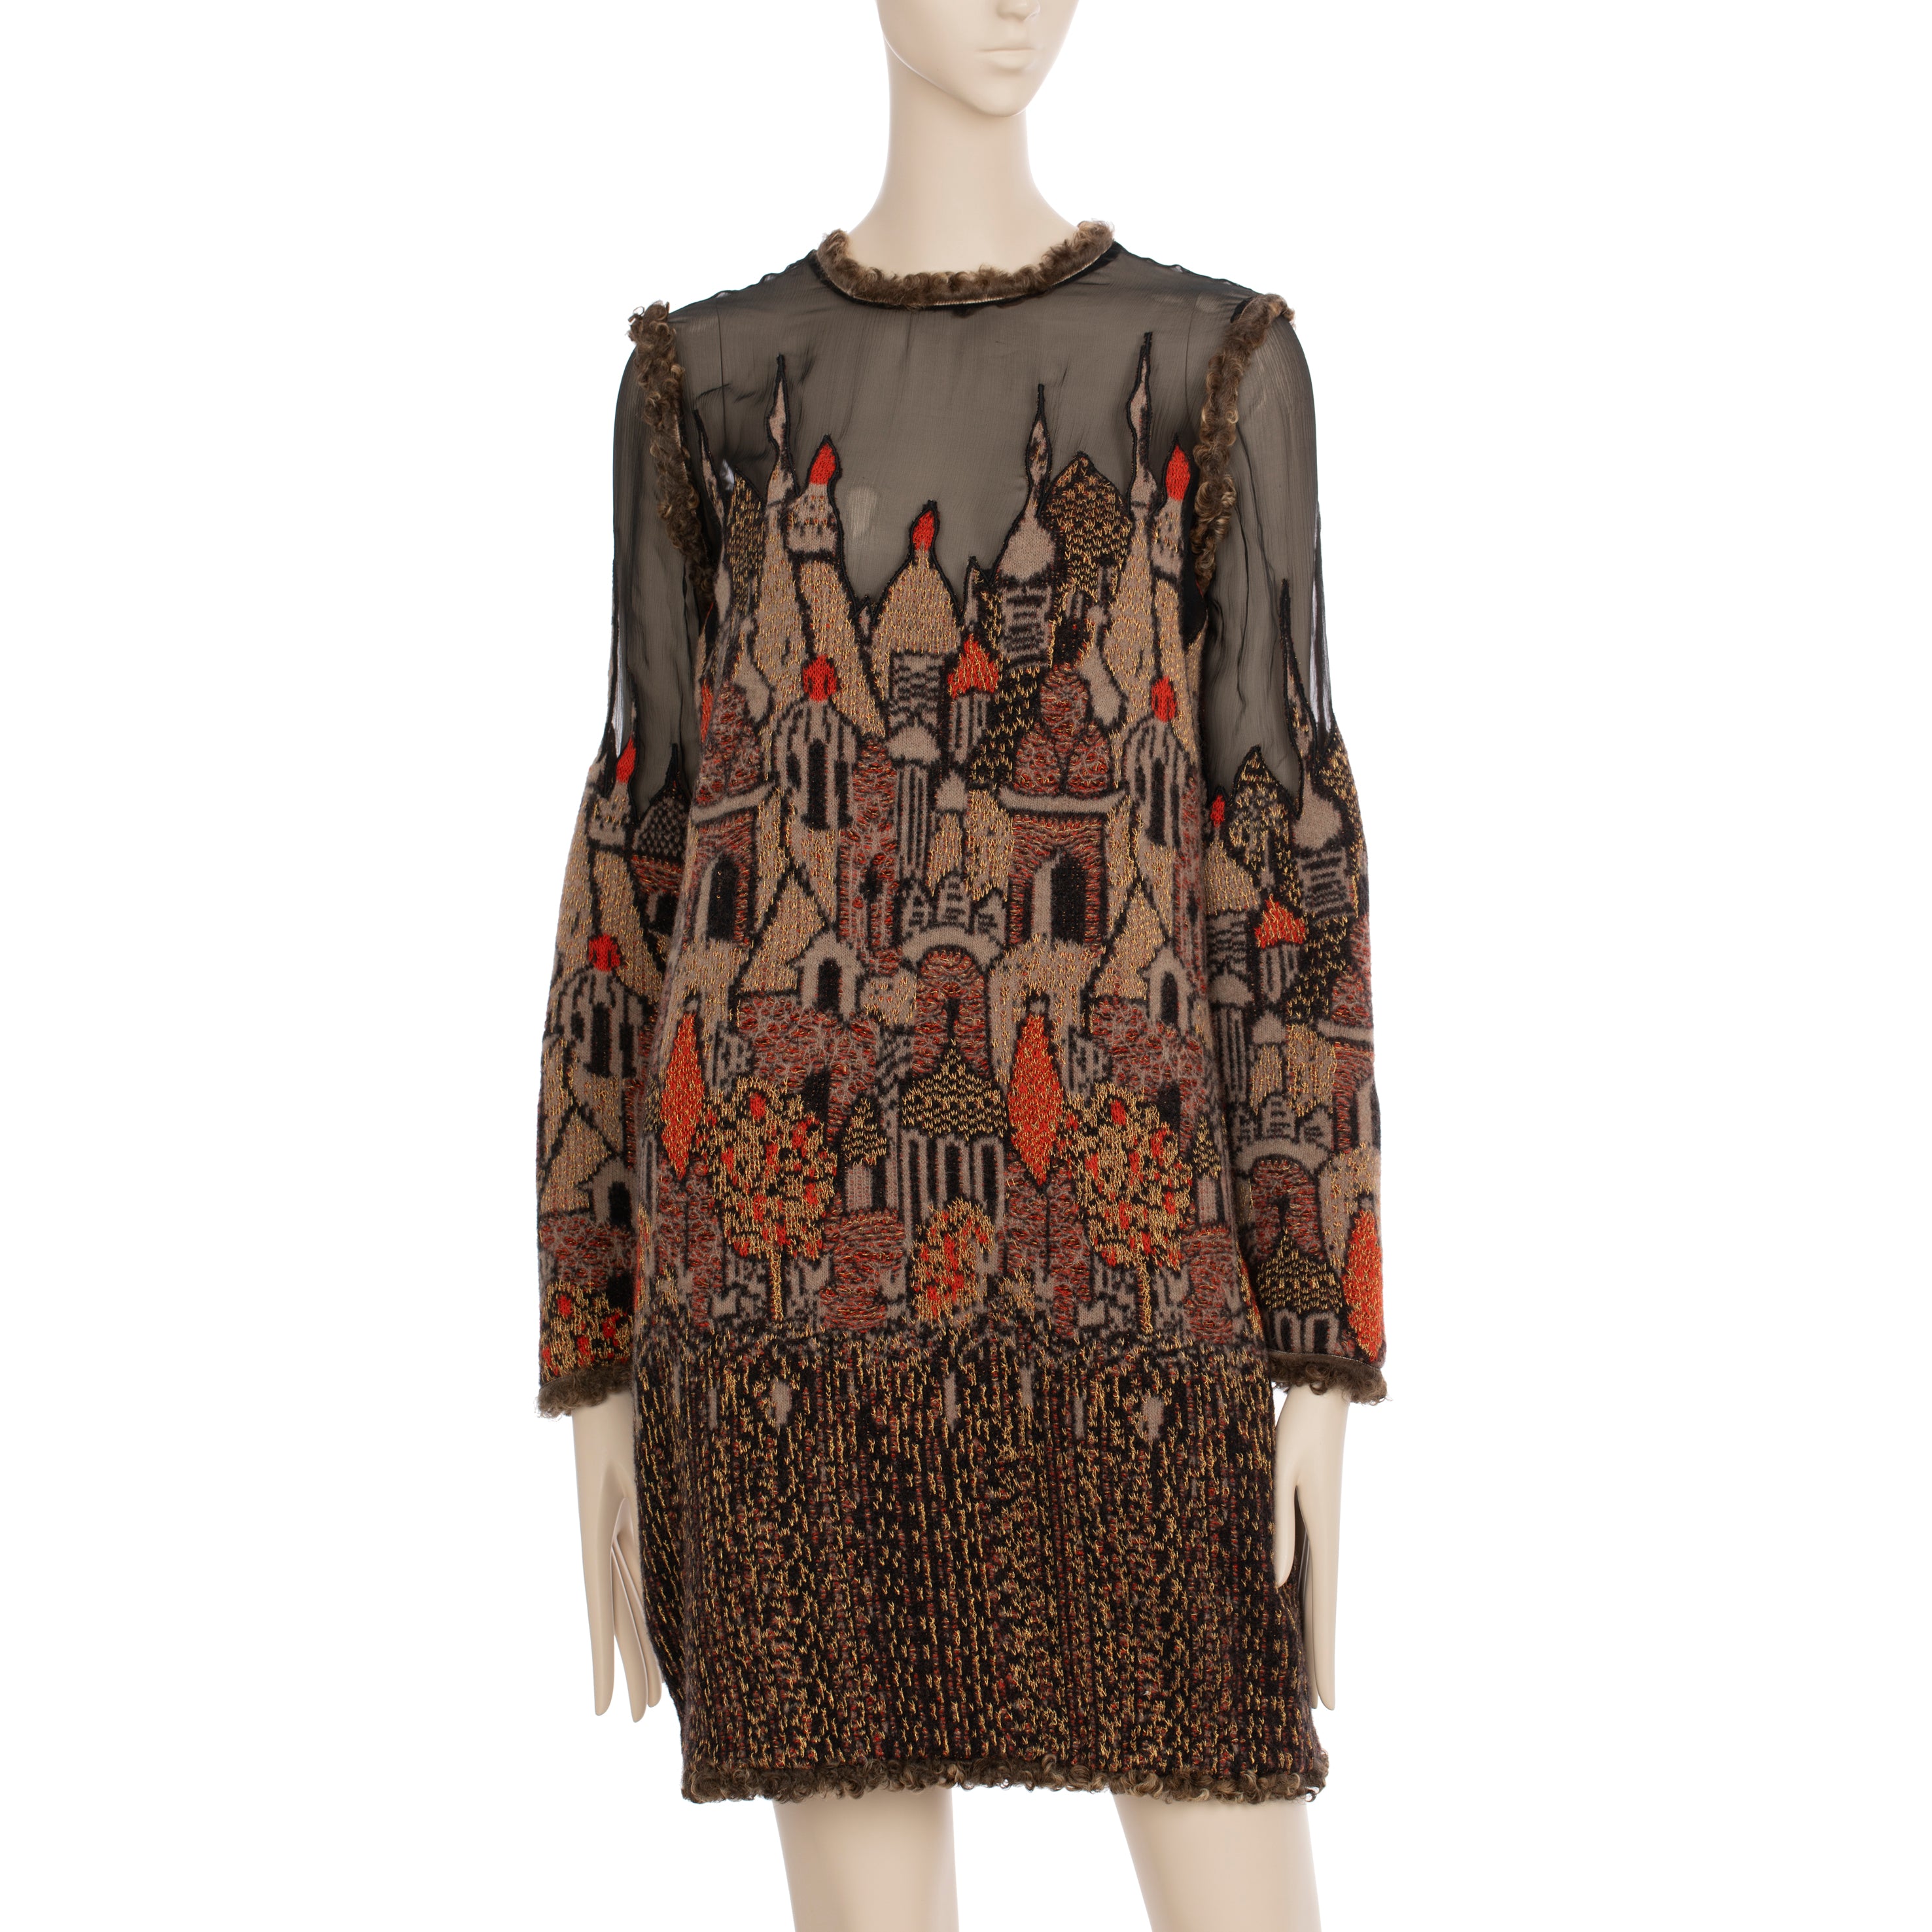 Chanel Metiers D'Art Moscow Dress 38 FR